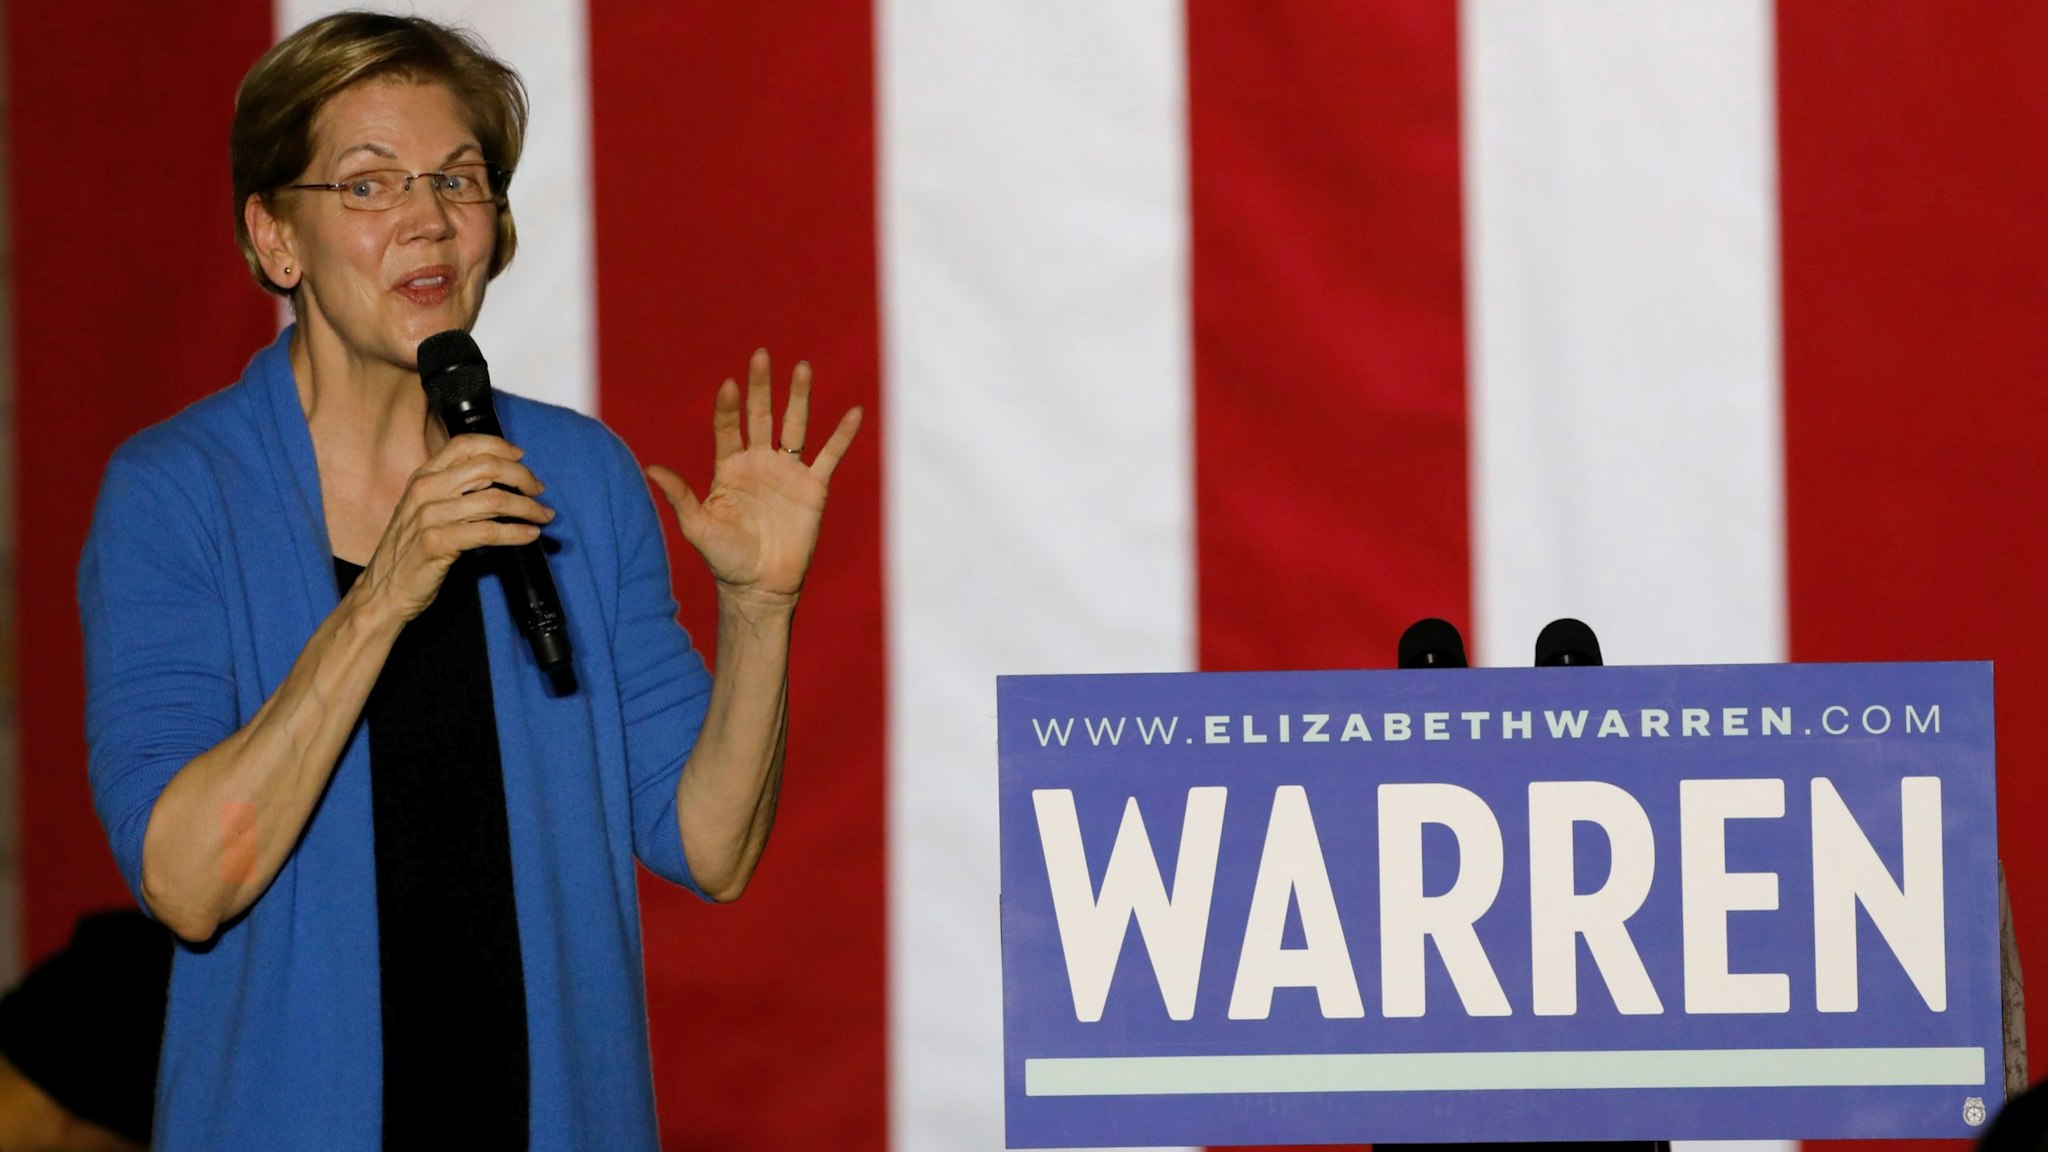 Democratic presidential hopeful Massachusetts Senator Elizabeth Warren speaks during a campaign rally at Eastern Market in Detroit, Michigan, on March 3, 2020. - Fourteen states and American Samoa are holding presidential primary elections, with over 1400 delegates at stake. (Photo by JEFF KOWALSKY / AFP) (Photo by JEFF KOWALSKY/AFP via Getty Images)